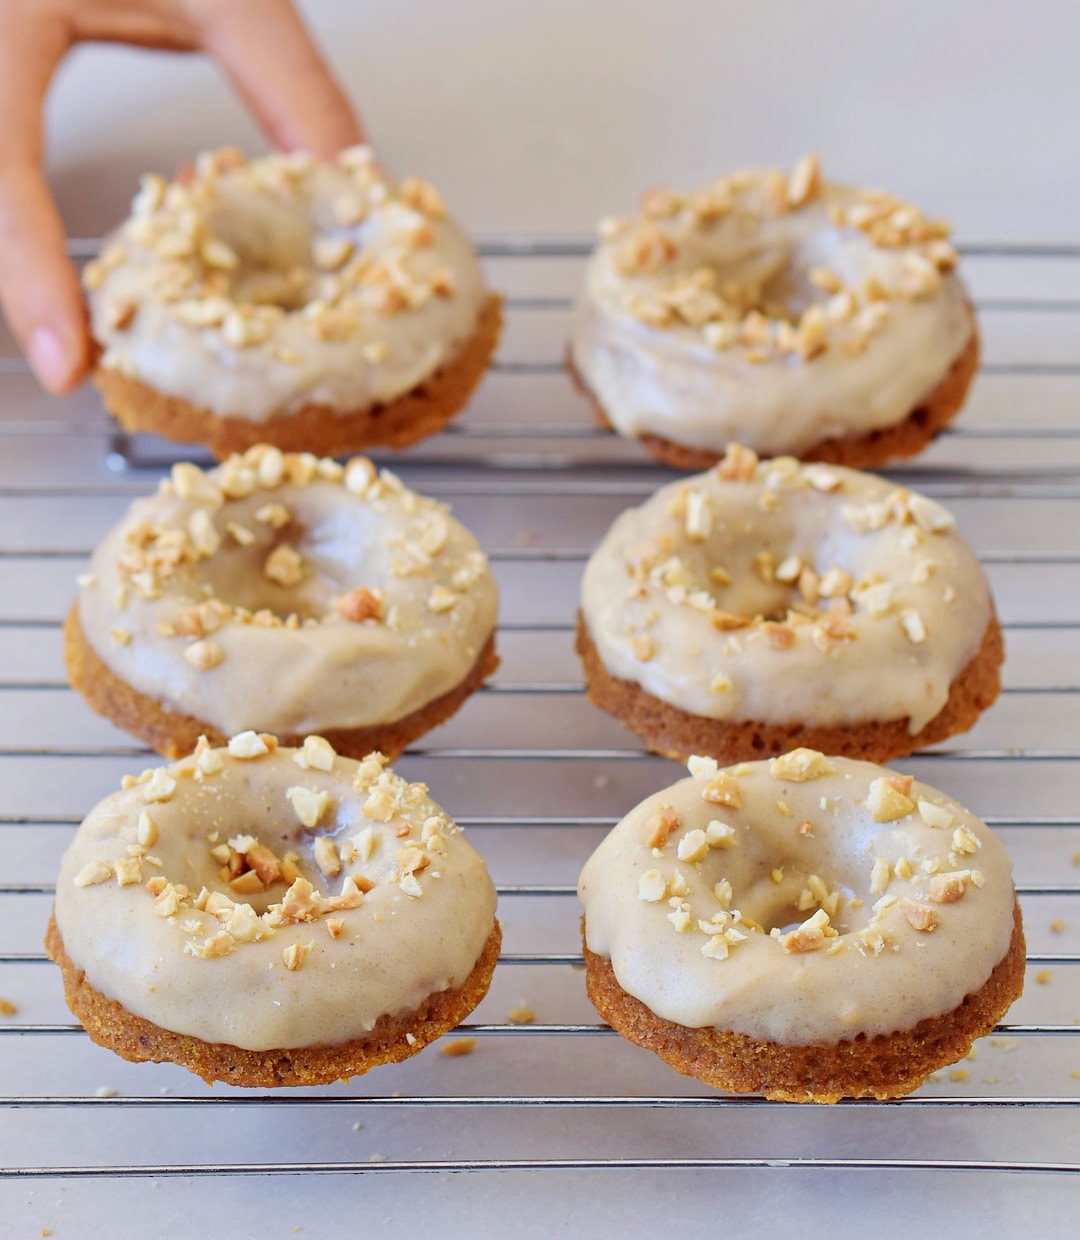 hand grabbing vegan carrot cake donuts with gingerbread flavor and frosting on a wire rack